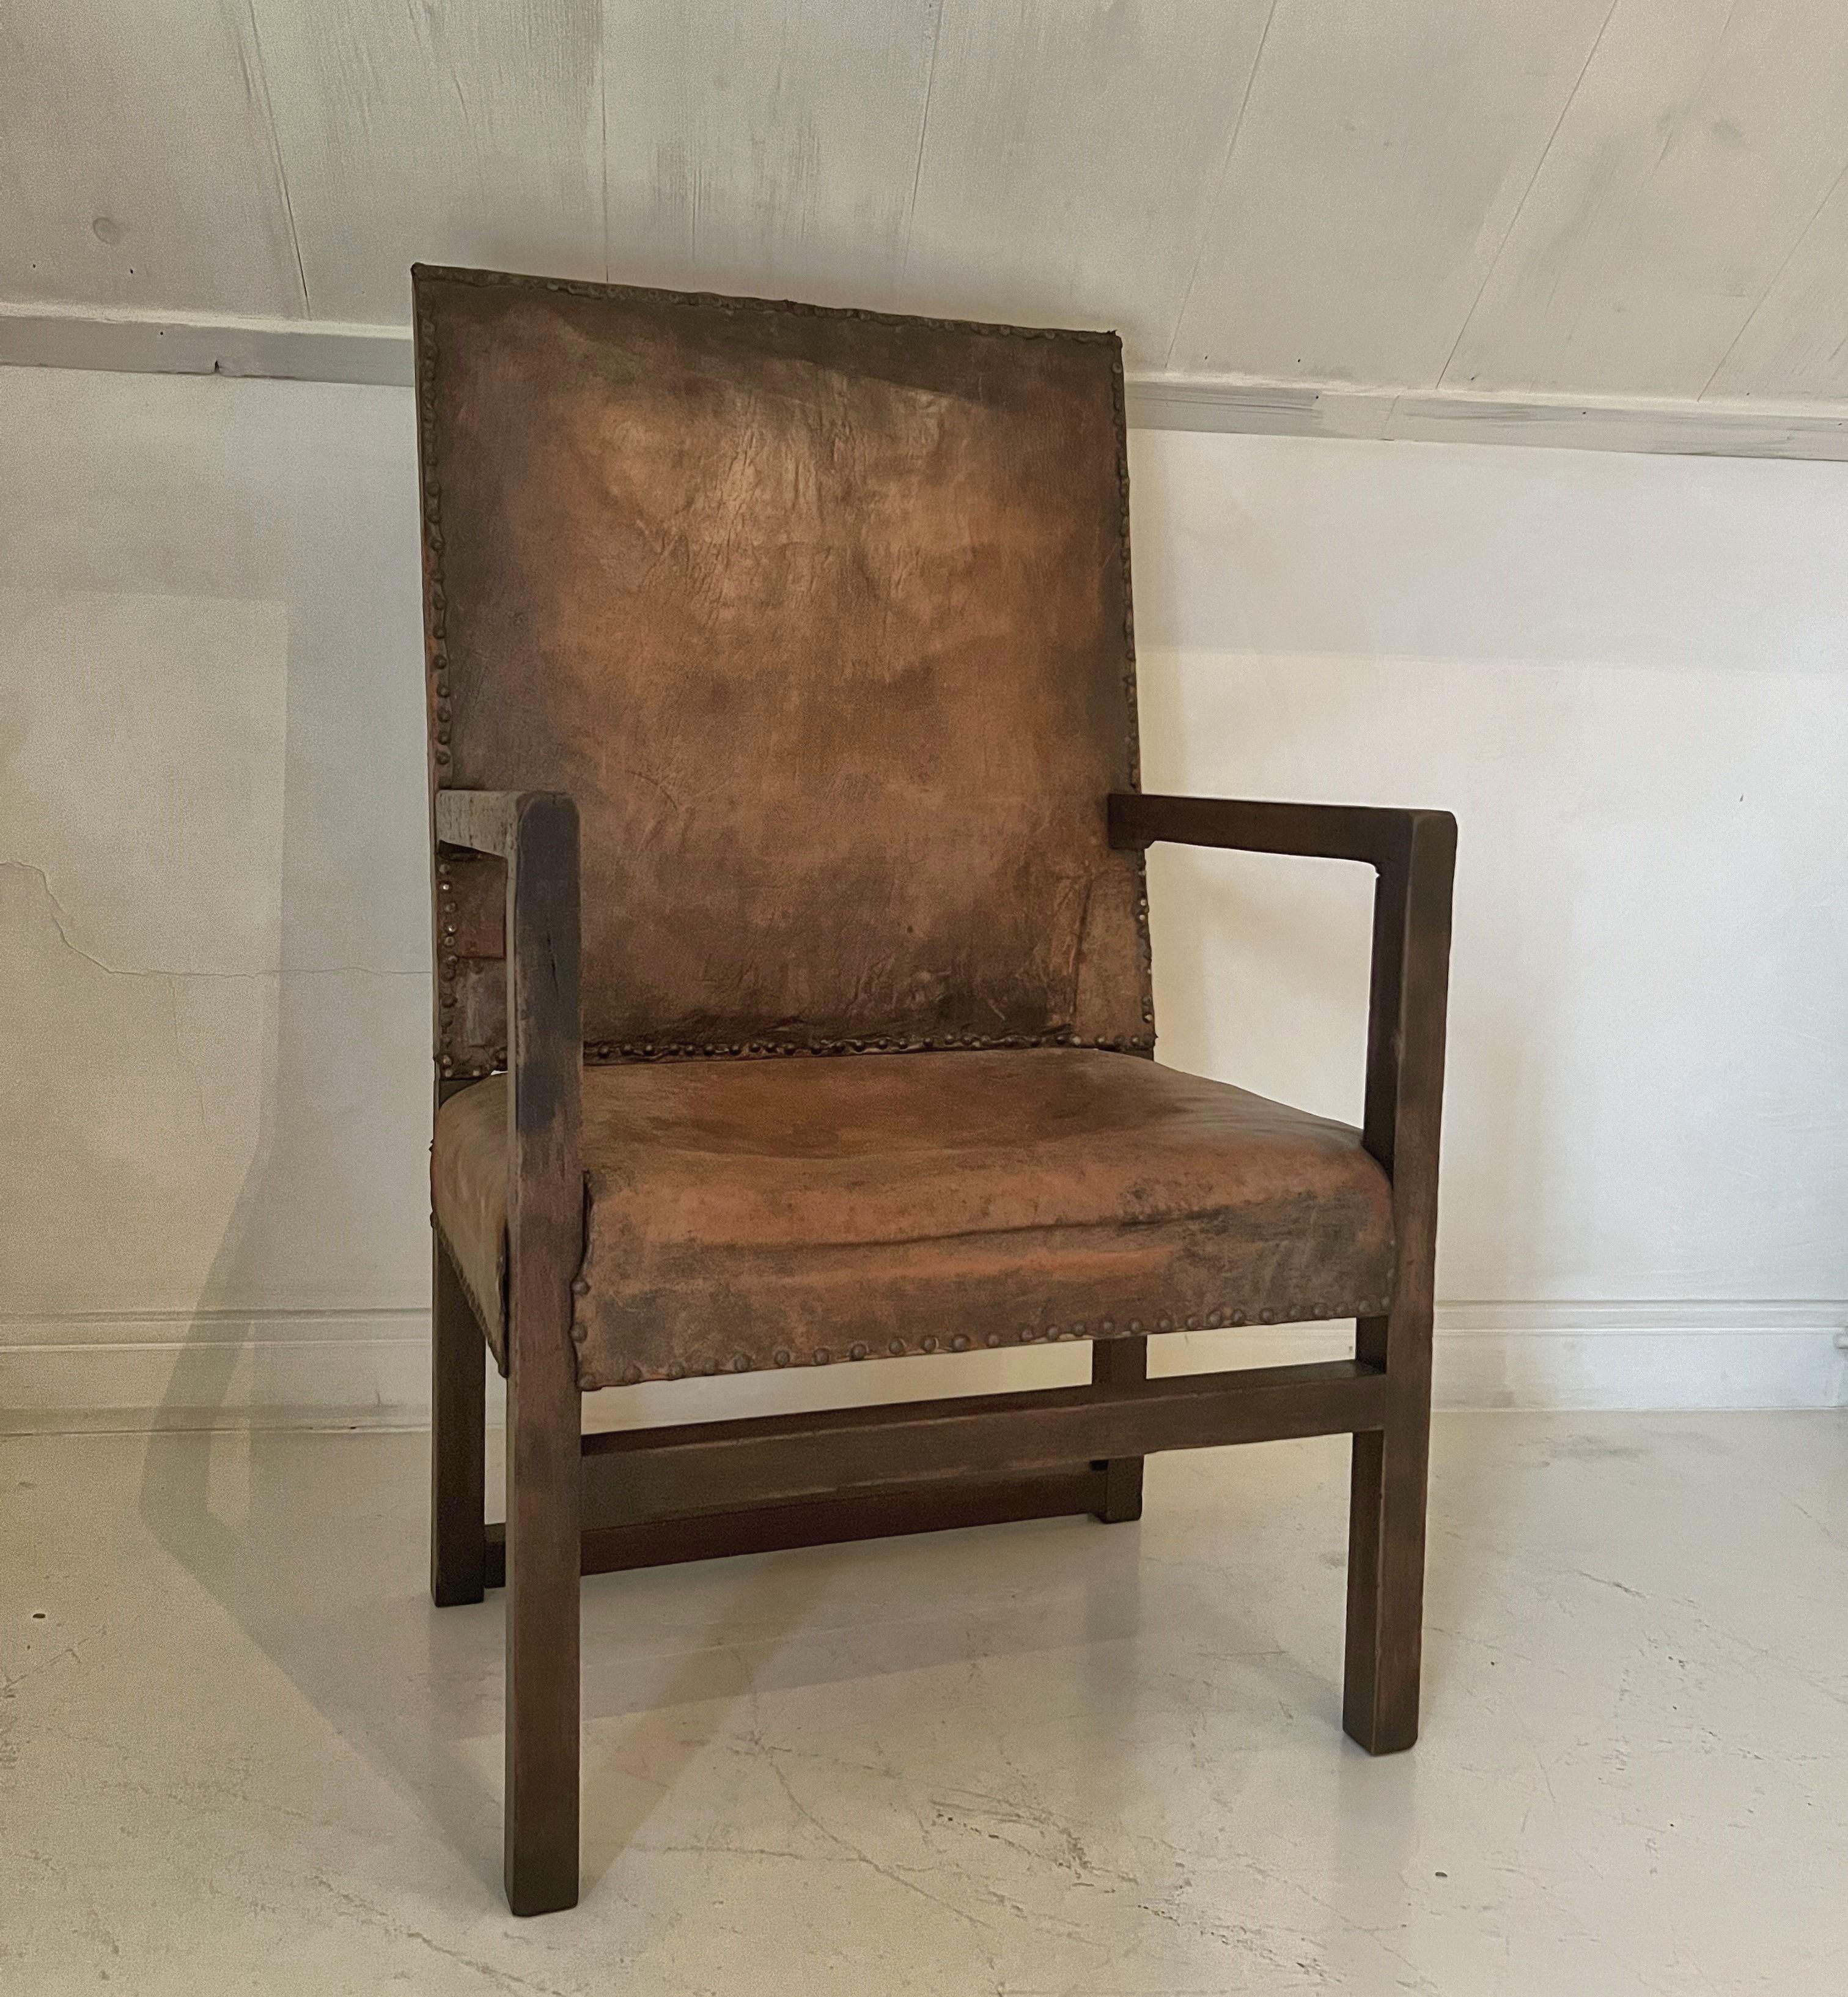 A 17th century armchair with beautifully patined walnut and leather. The design almost timeless with simple yet perfectly proportioned straight lines. Sturdy and very comfortable. All together a piece that could fit in any setting and ads some